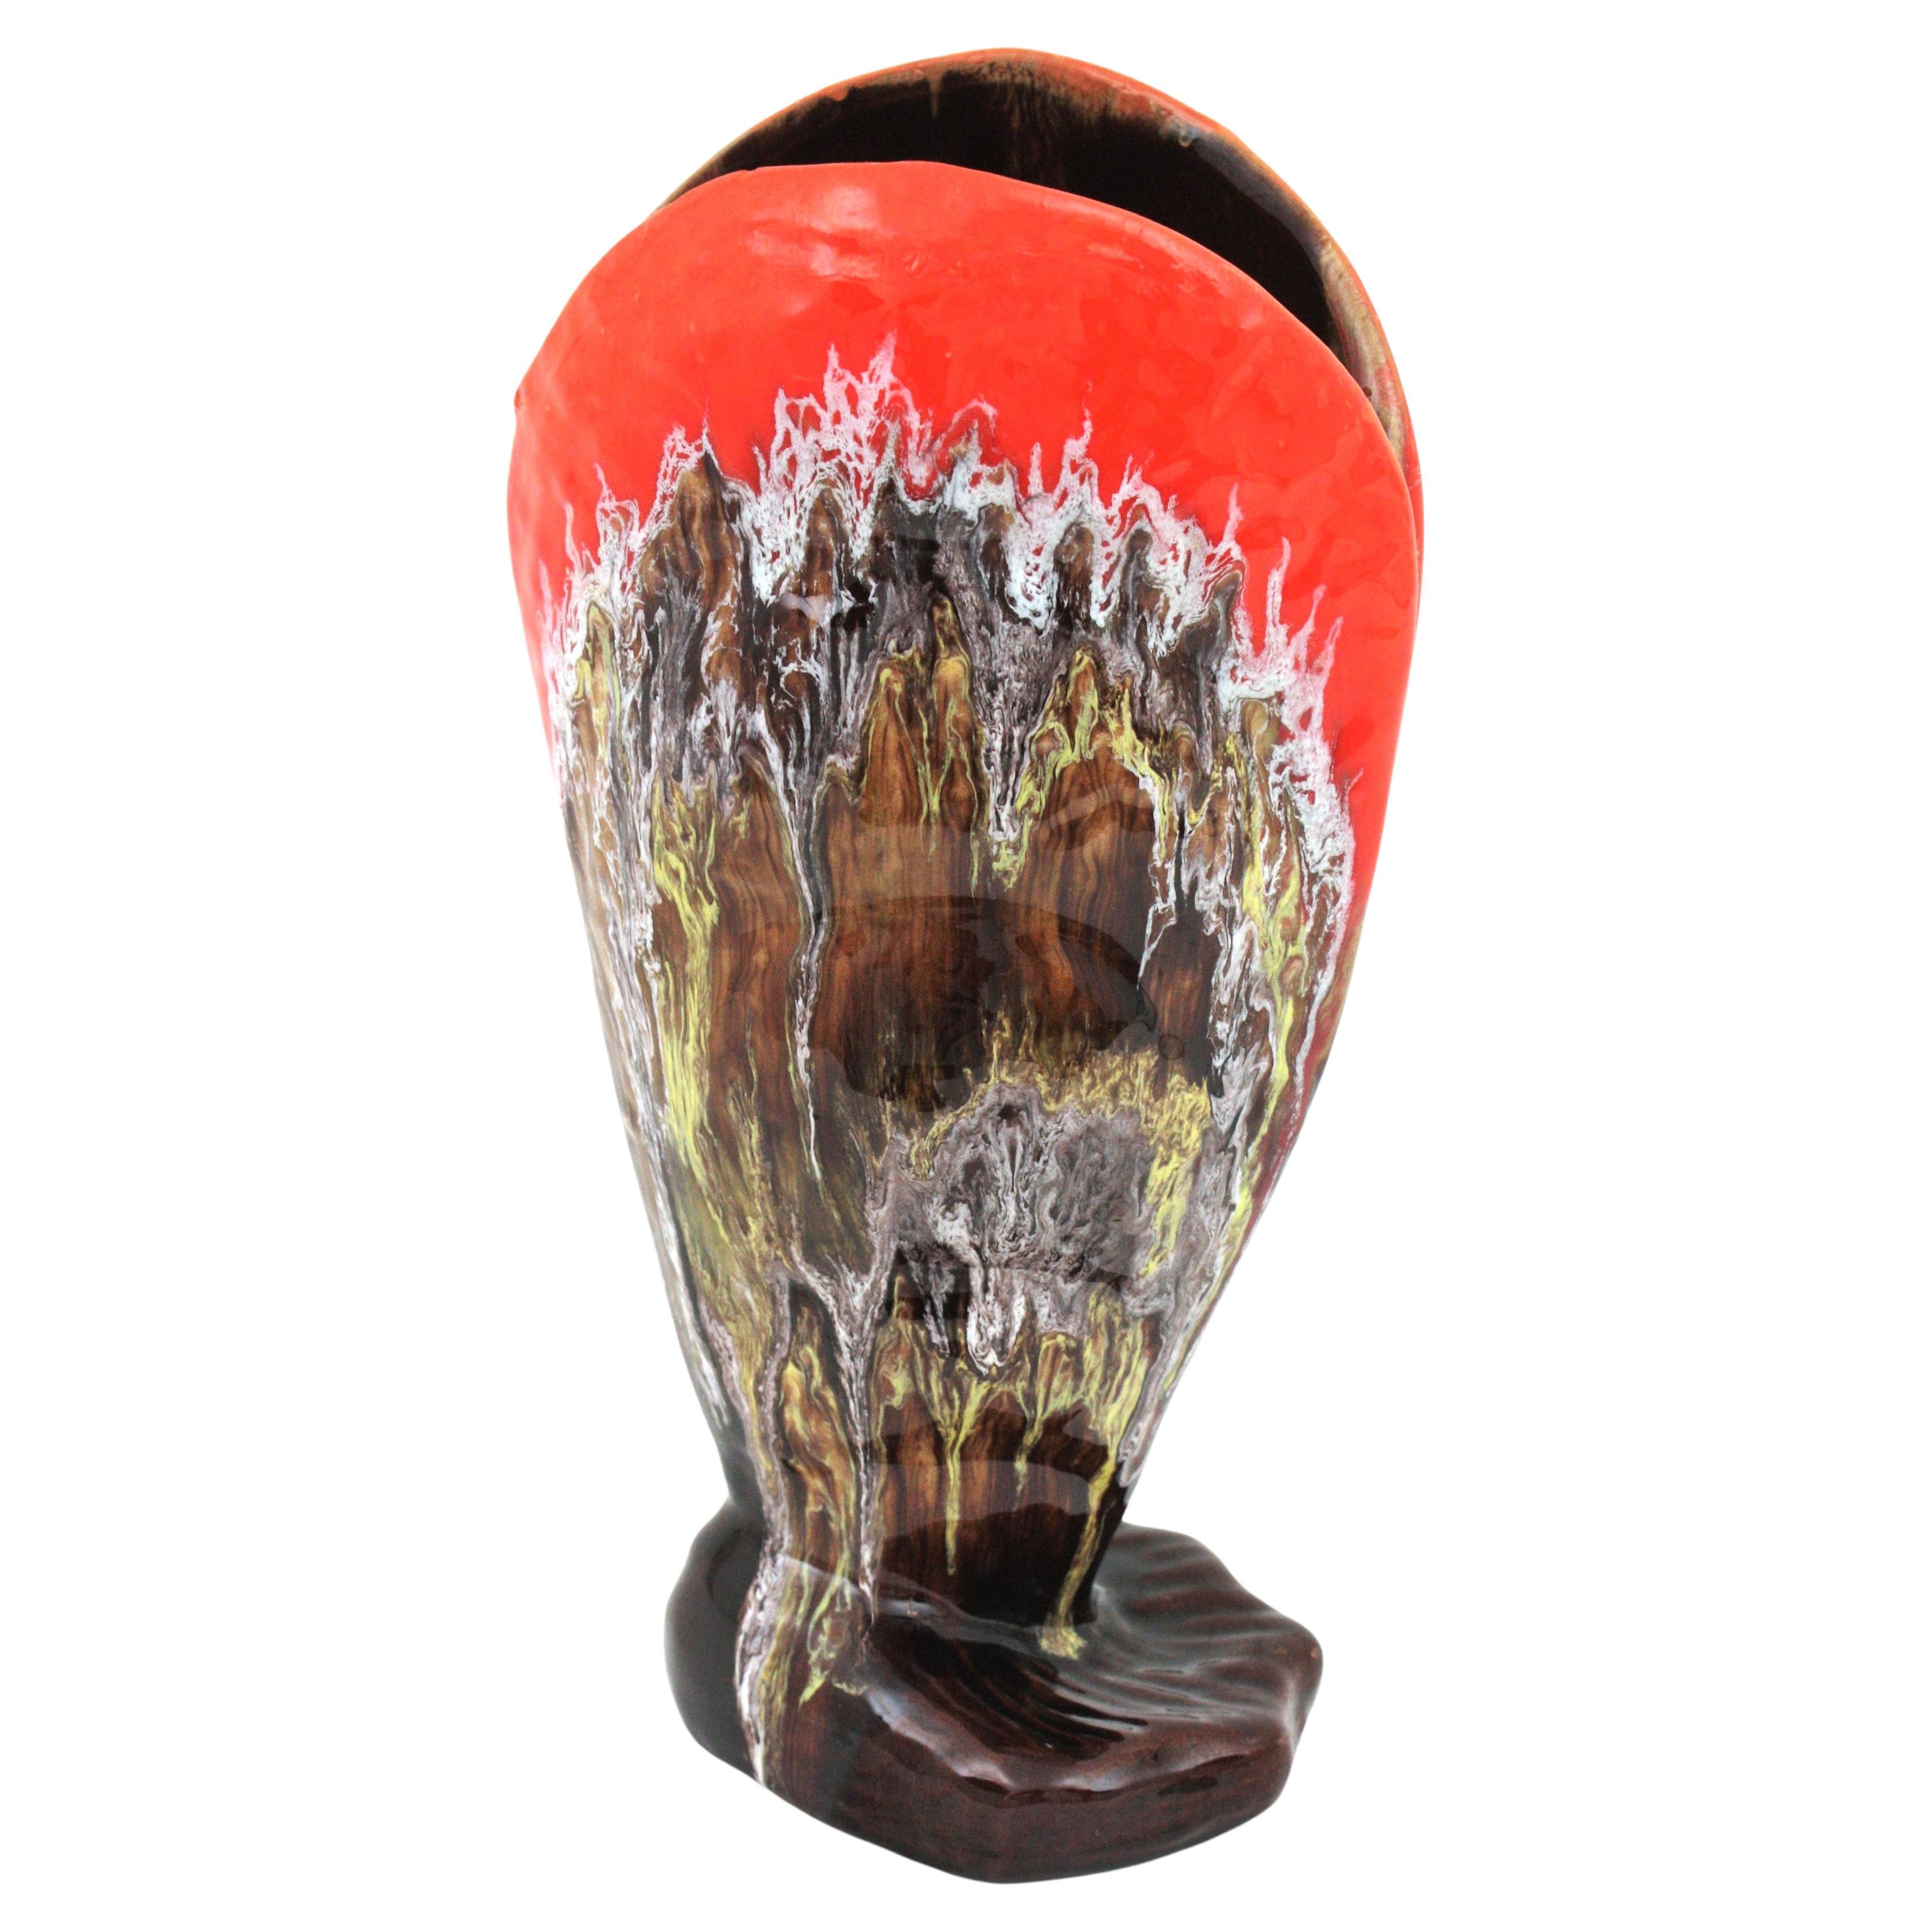 Large Vallauris Majolica Shell Shaped Vase, Orange and Brown Glazed Ceramic For Sale